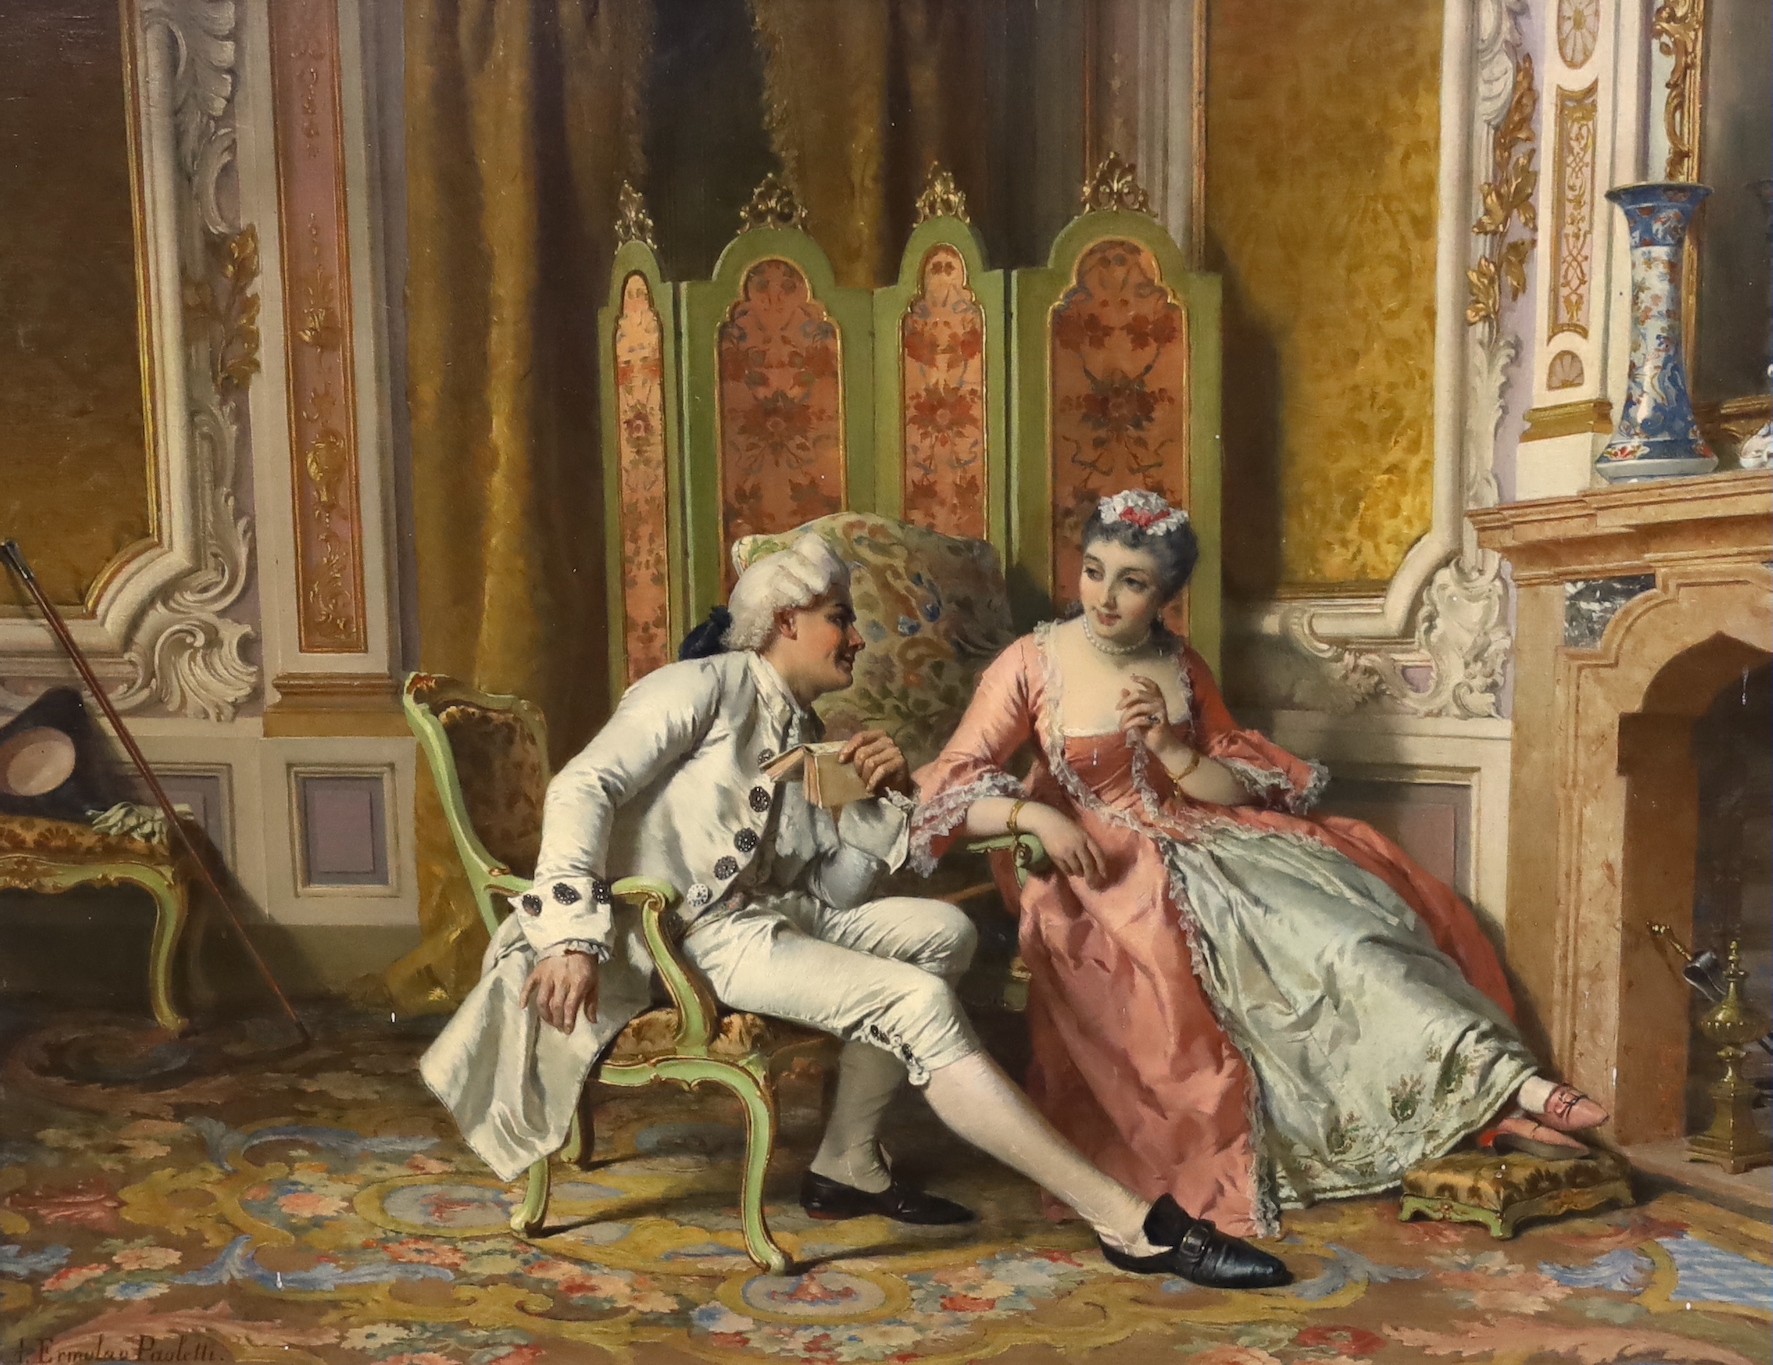 Antonio Ermolao Paoletti (Italian, 1834-1912), A romantic tryst in an elegant drawing room, oil on panel, 38 x 48cm